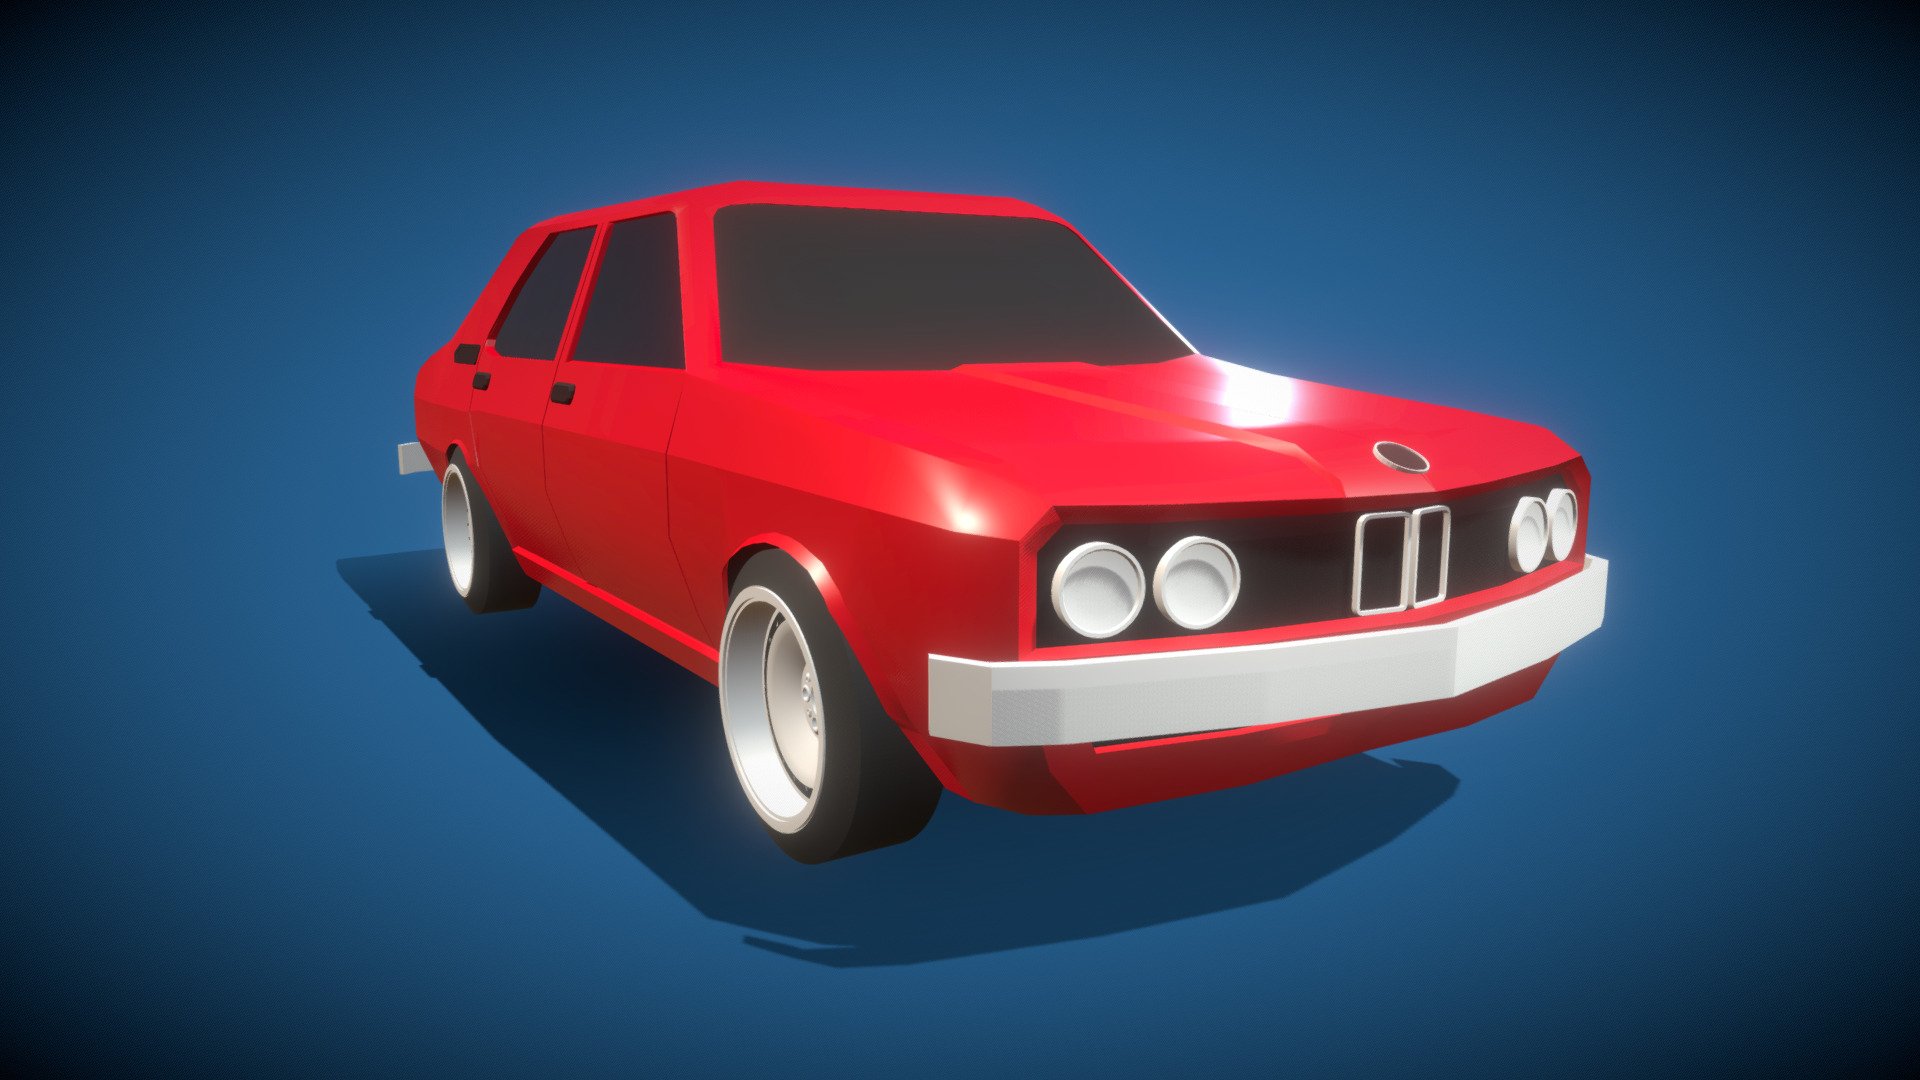 Bmw E12 Model
My first car made in Blender - Bmw E12 Model - Download Free 3D model by S.Design101 3d model